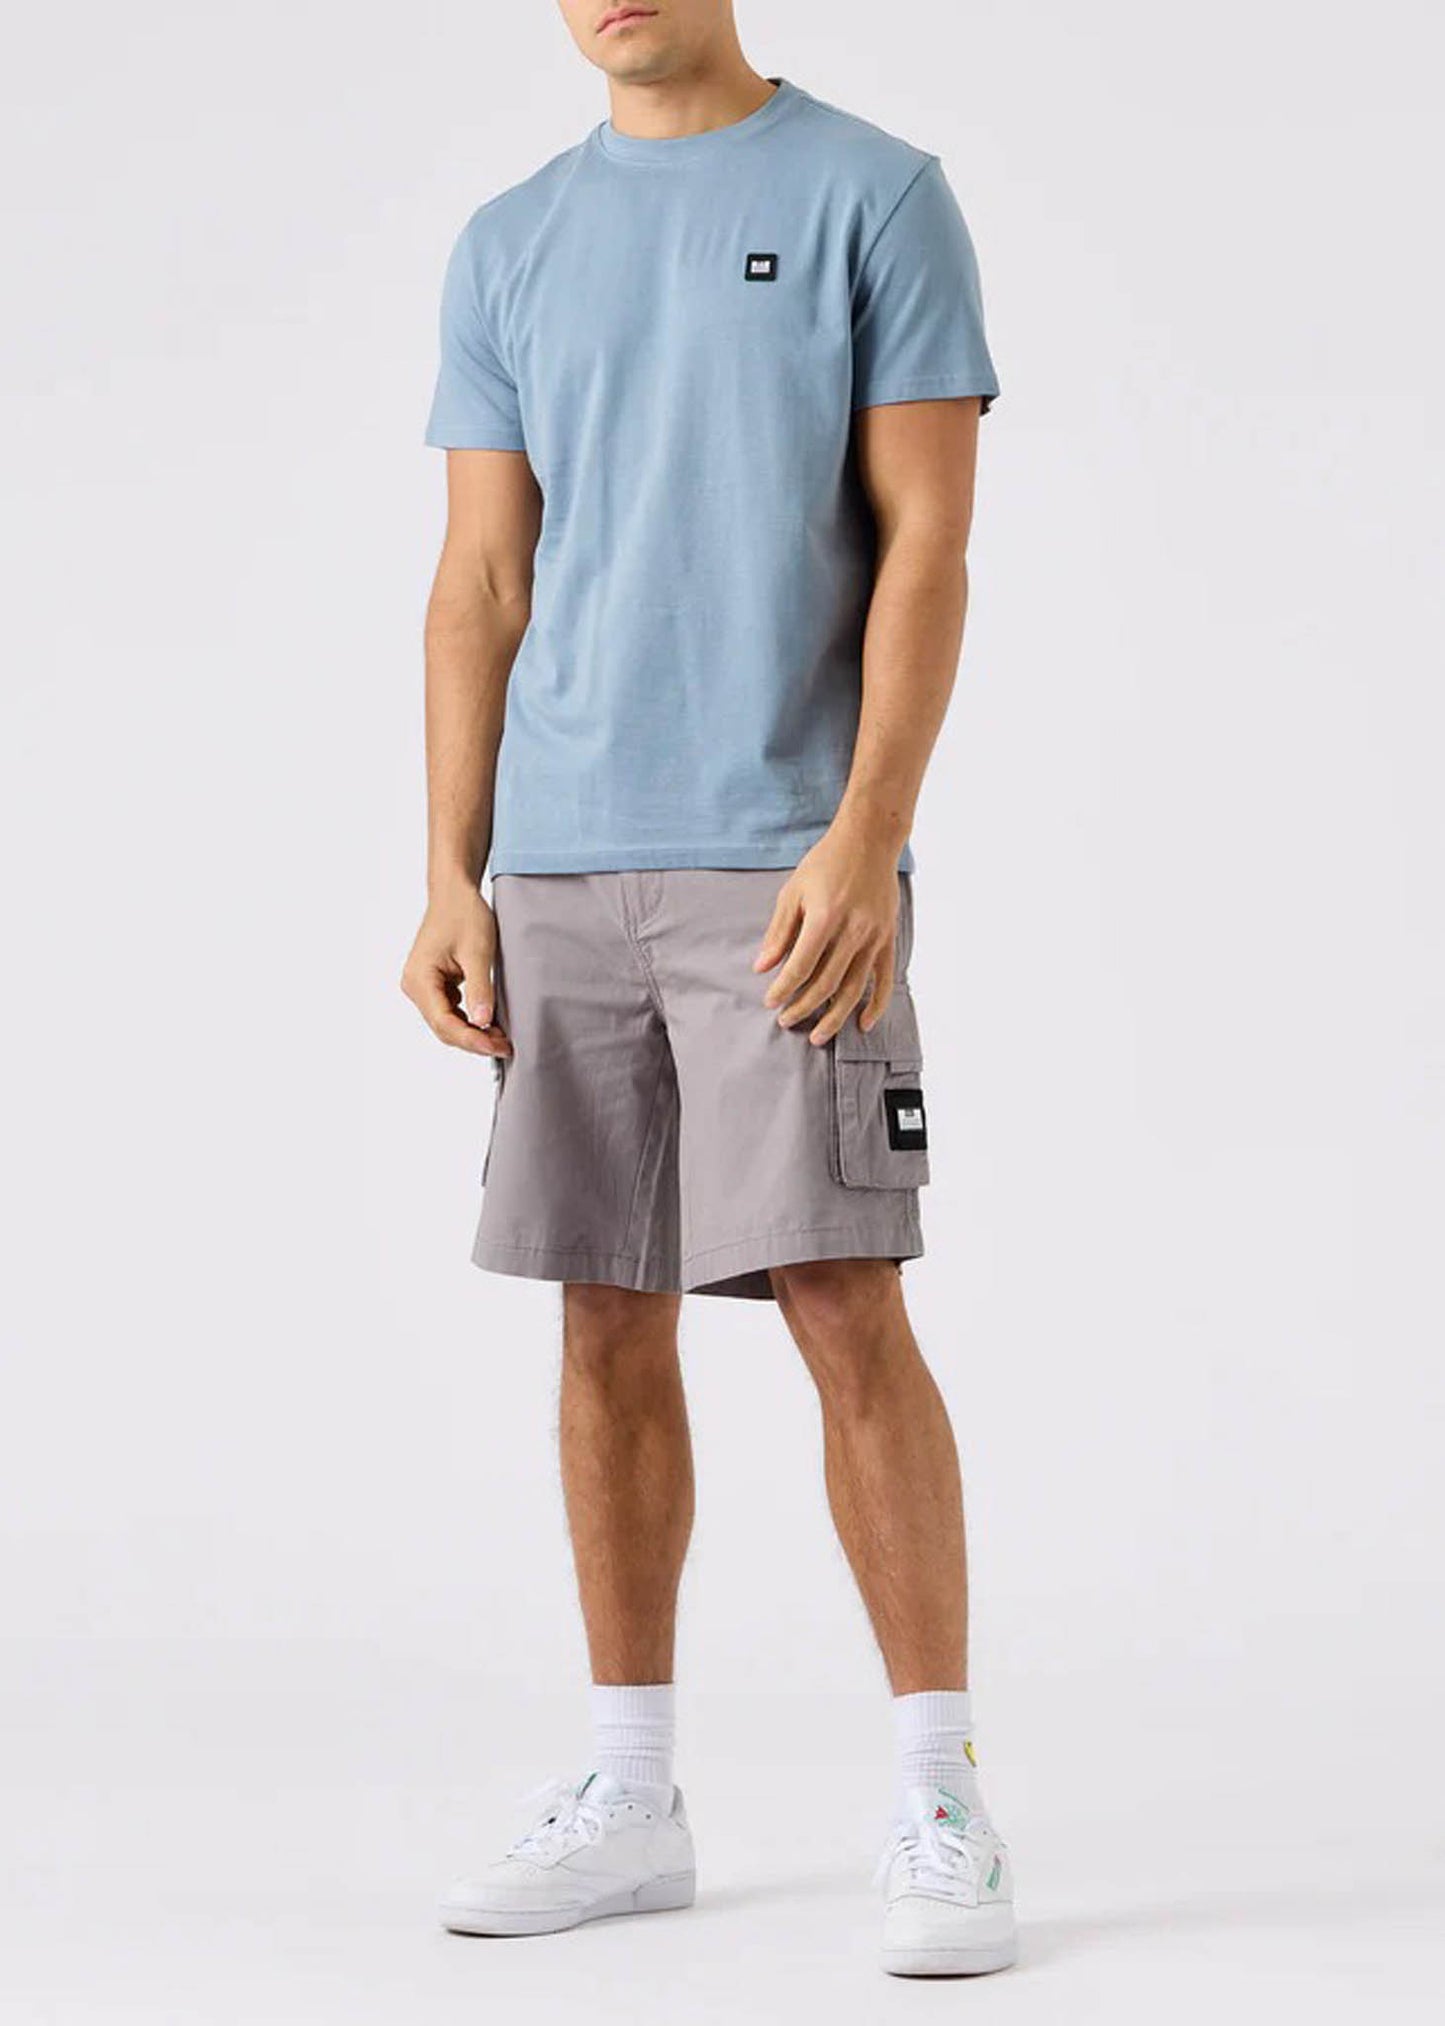 Weekend Offender T-shirts  Cannon beach - slate blue 